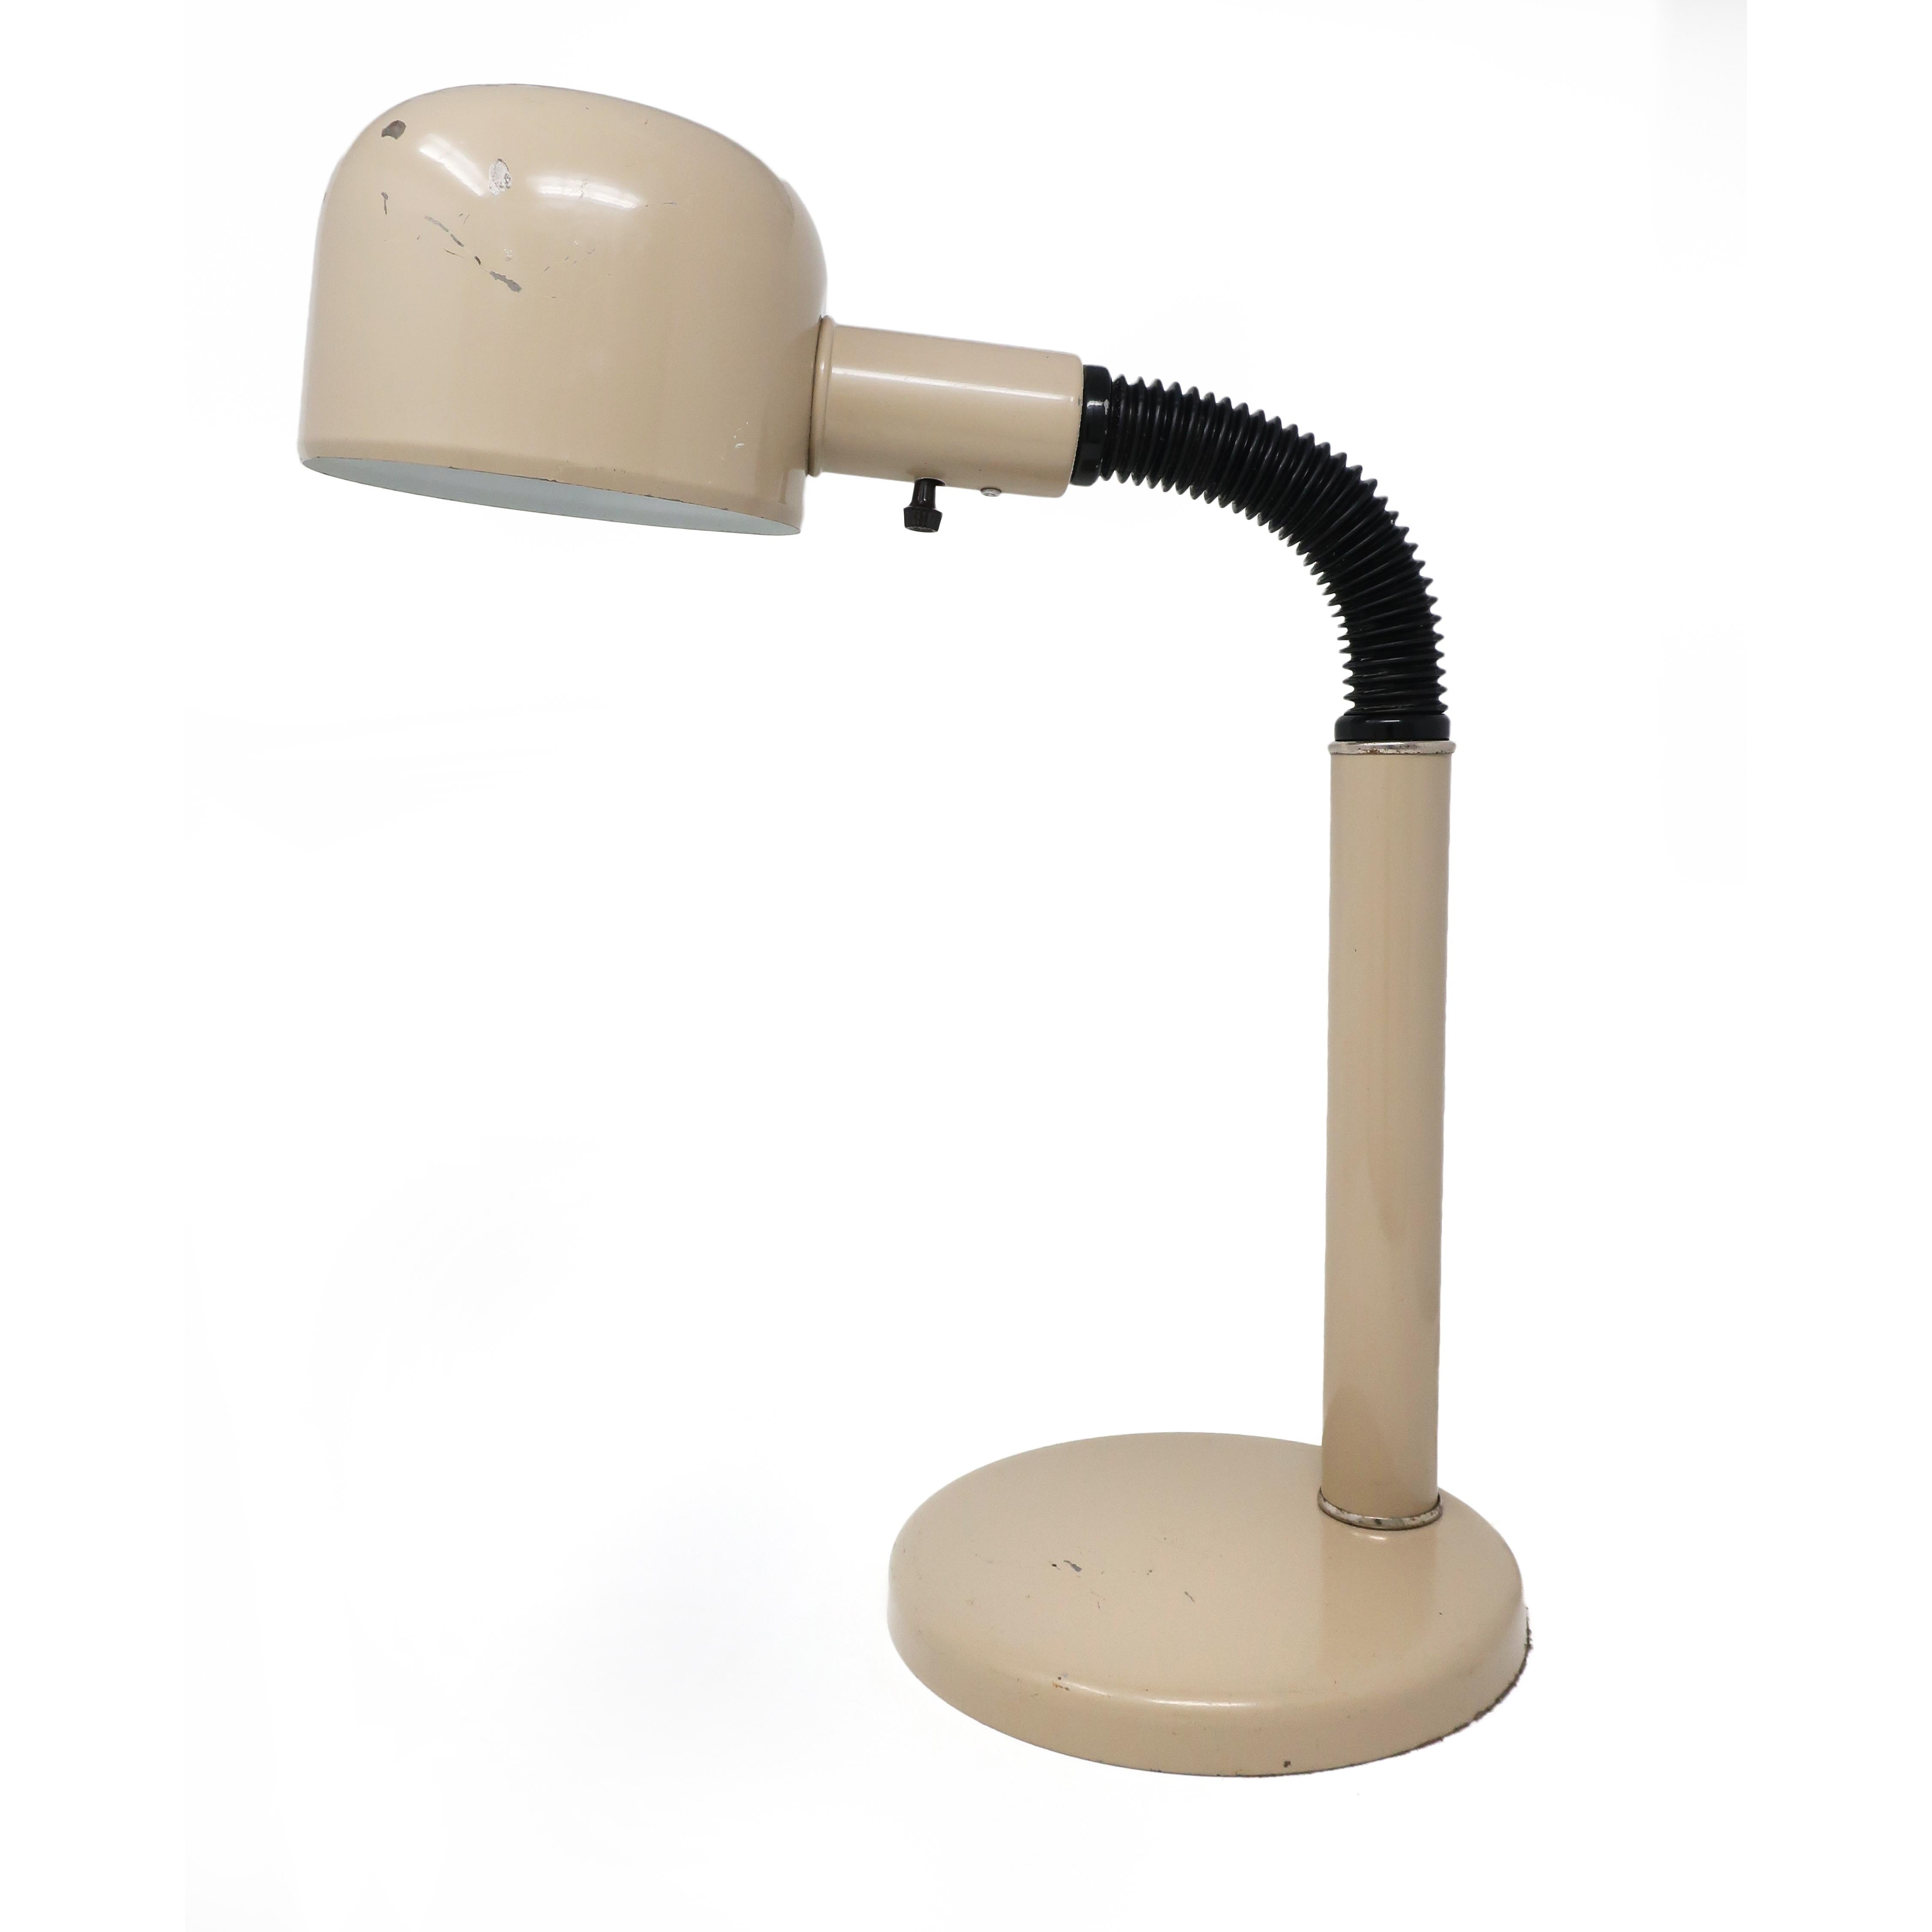 A fantastic space age tubular table lamp with tan metal shade, base and stem and black plastic adjustable neck. The mod metal shade and base have a few small paint loss spots. In very good vintage condition and works perfectly.

Measures: 8